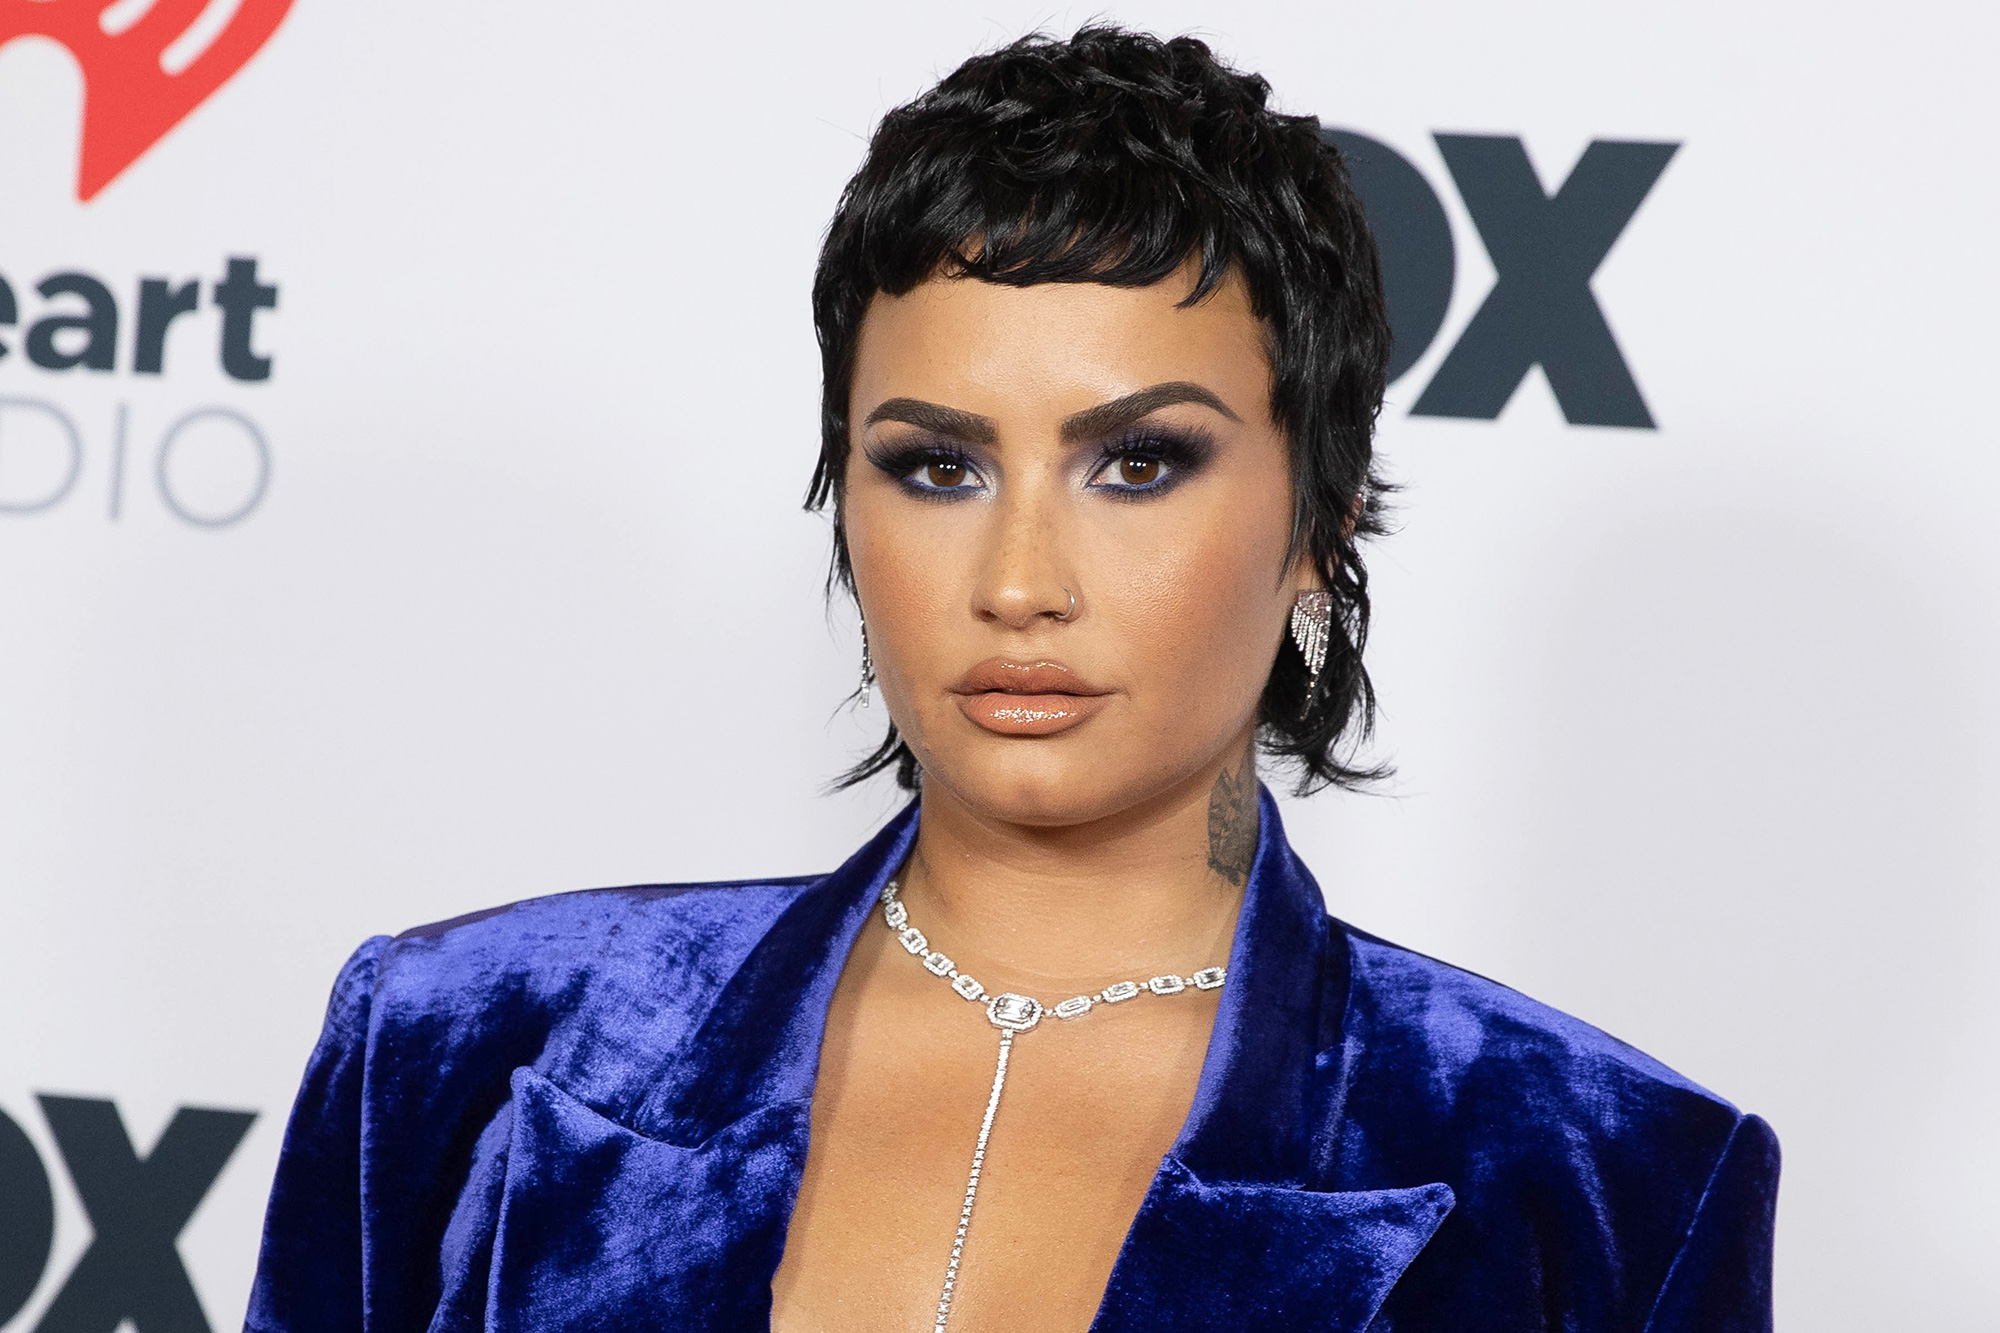 sexy celebs we don't think are hot - Demi Lovato